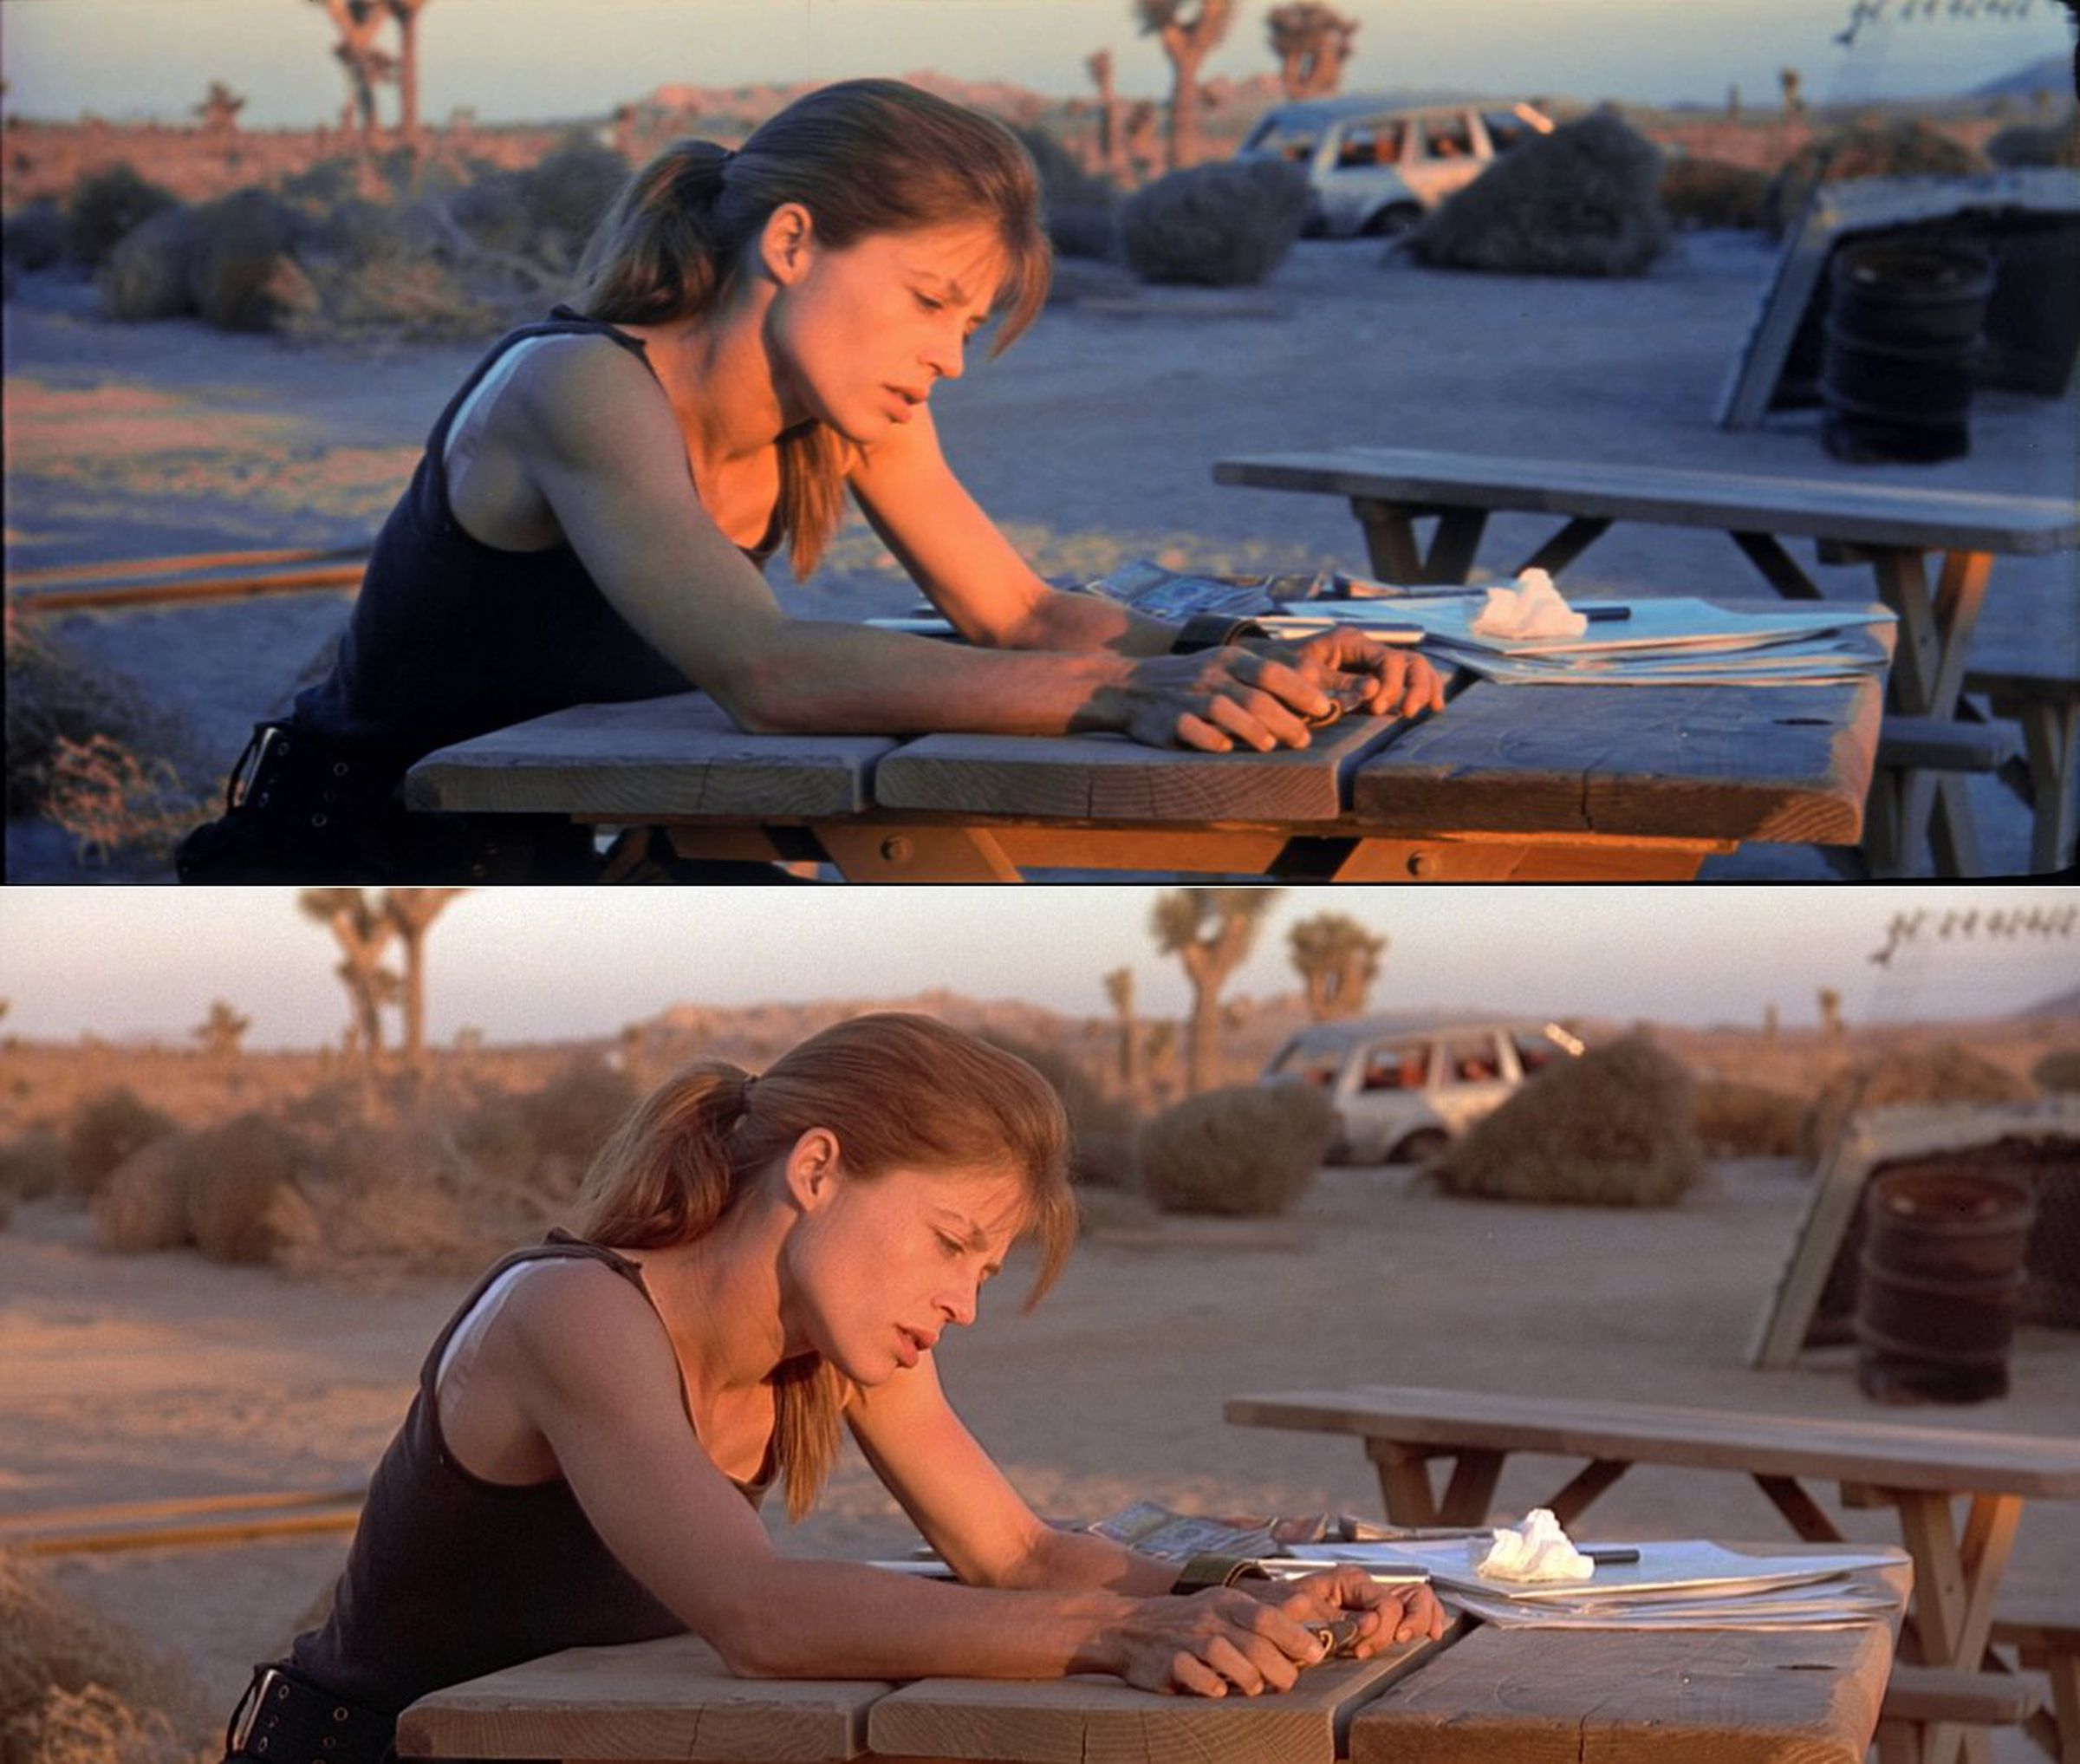 Two shots showing Linda Hamilton’s character sitting at a picnic table at sunset. In the fan restoration (top) shows much bluer shadows, while the lower from a Blu-ray version, has less contrast and a redder overall hue.